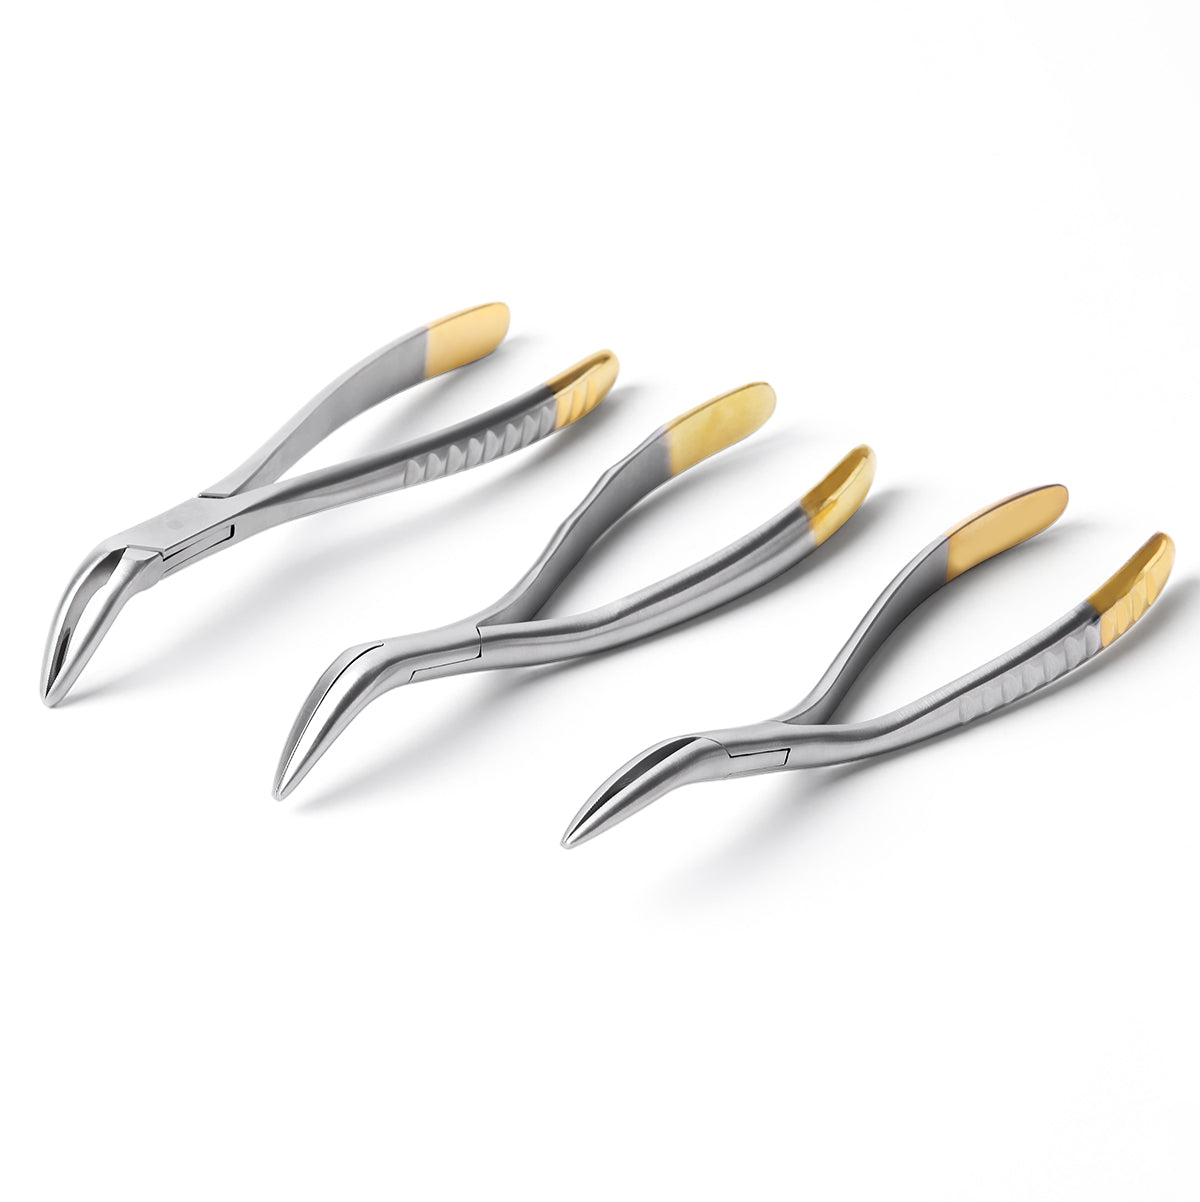 Dental Root Fragment Minimally Invasive Tooth Extraction Forceps Pliers Set 3Pcs - pairaydental.com